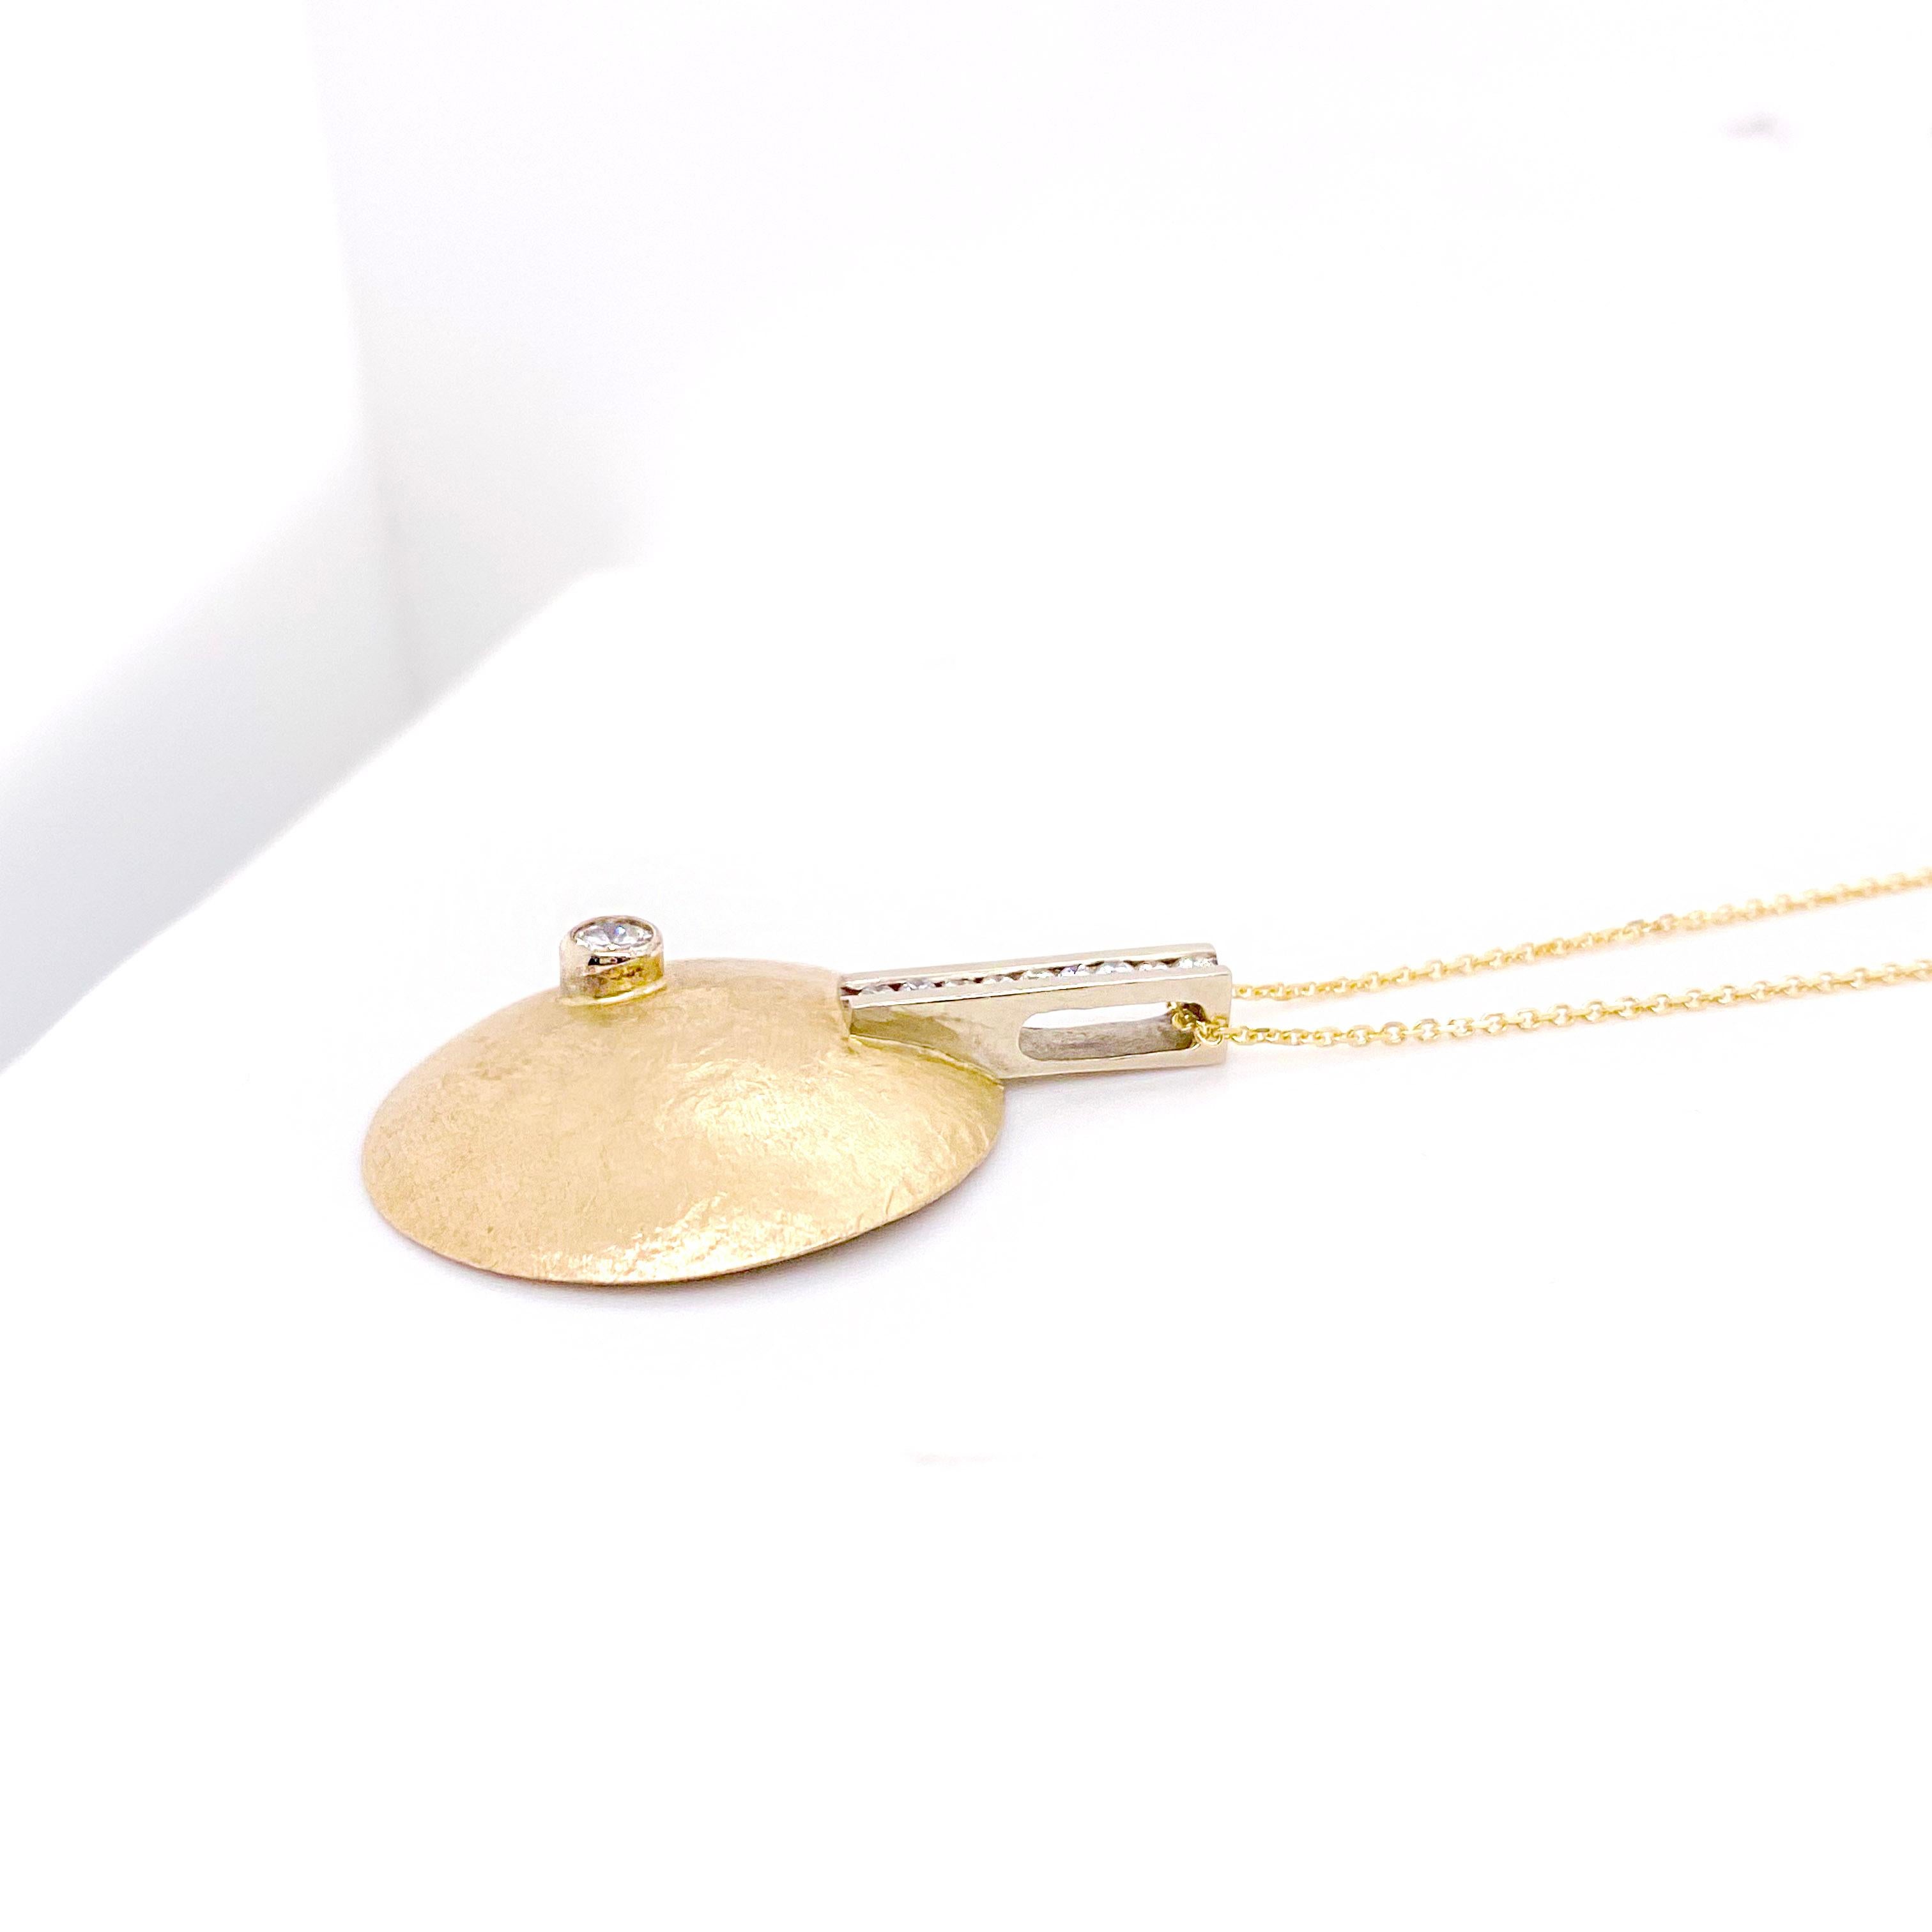 Gold Disk Diamond Pendant Necklace, Yellow Gold, Hammered Circle Pendant In New Condition For Sale In Austin, TX